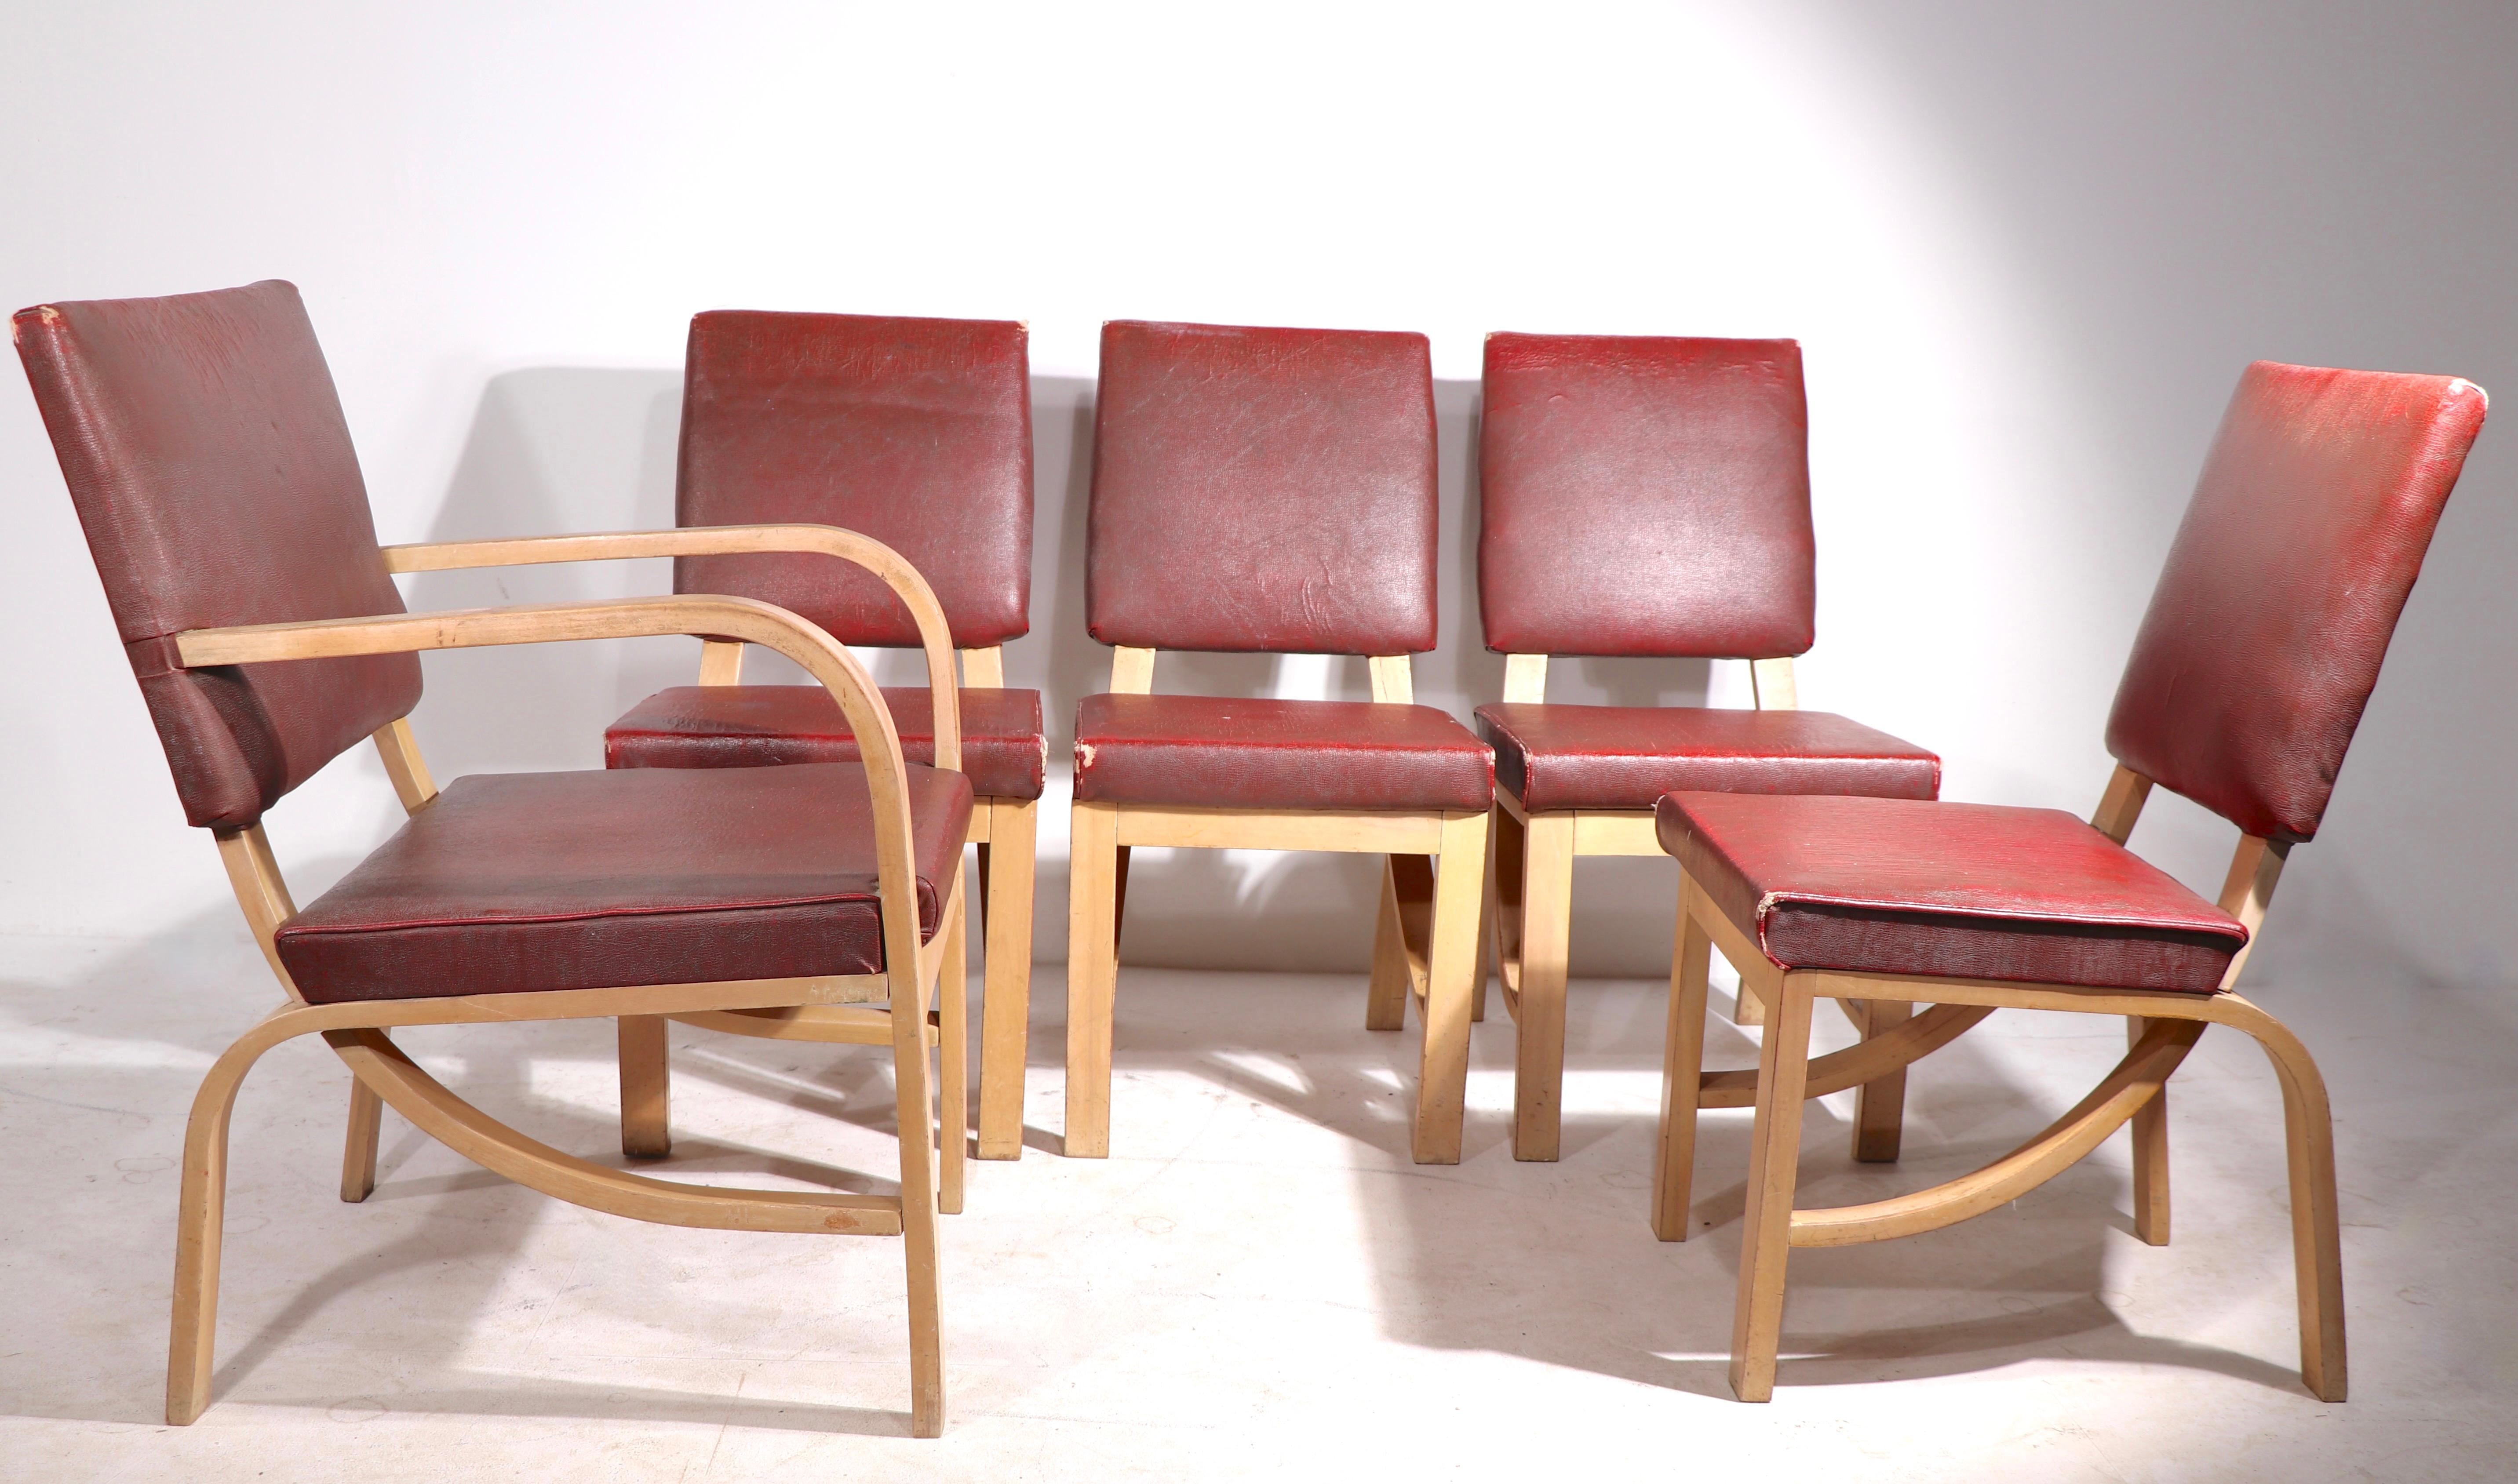 Upholstery Set of 5 Rohde for Heywood Wakefield Dining Chairs